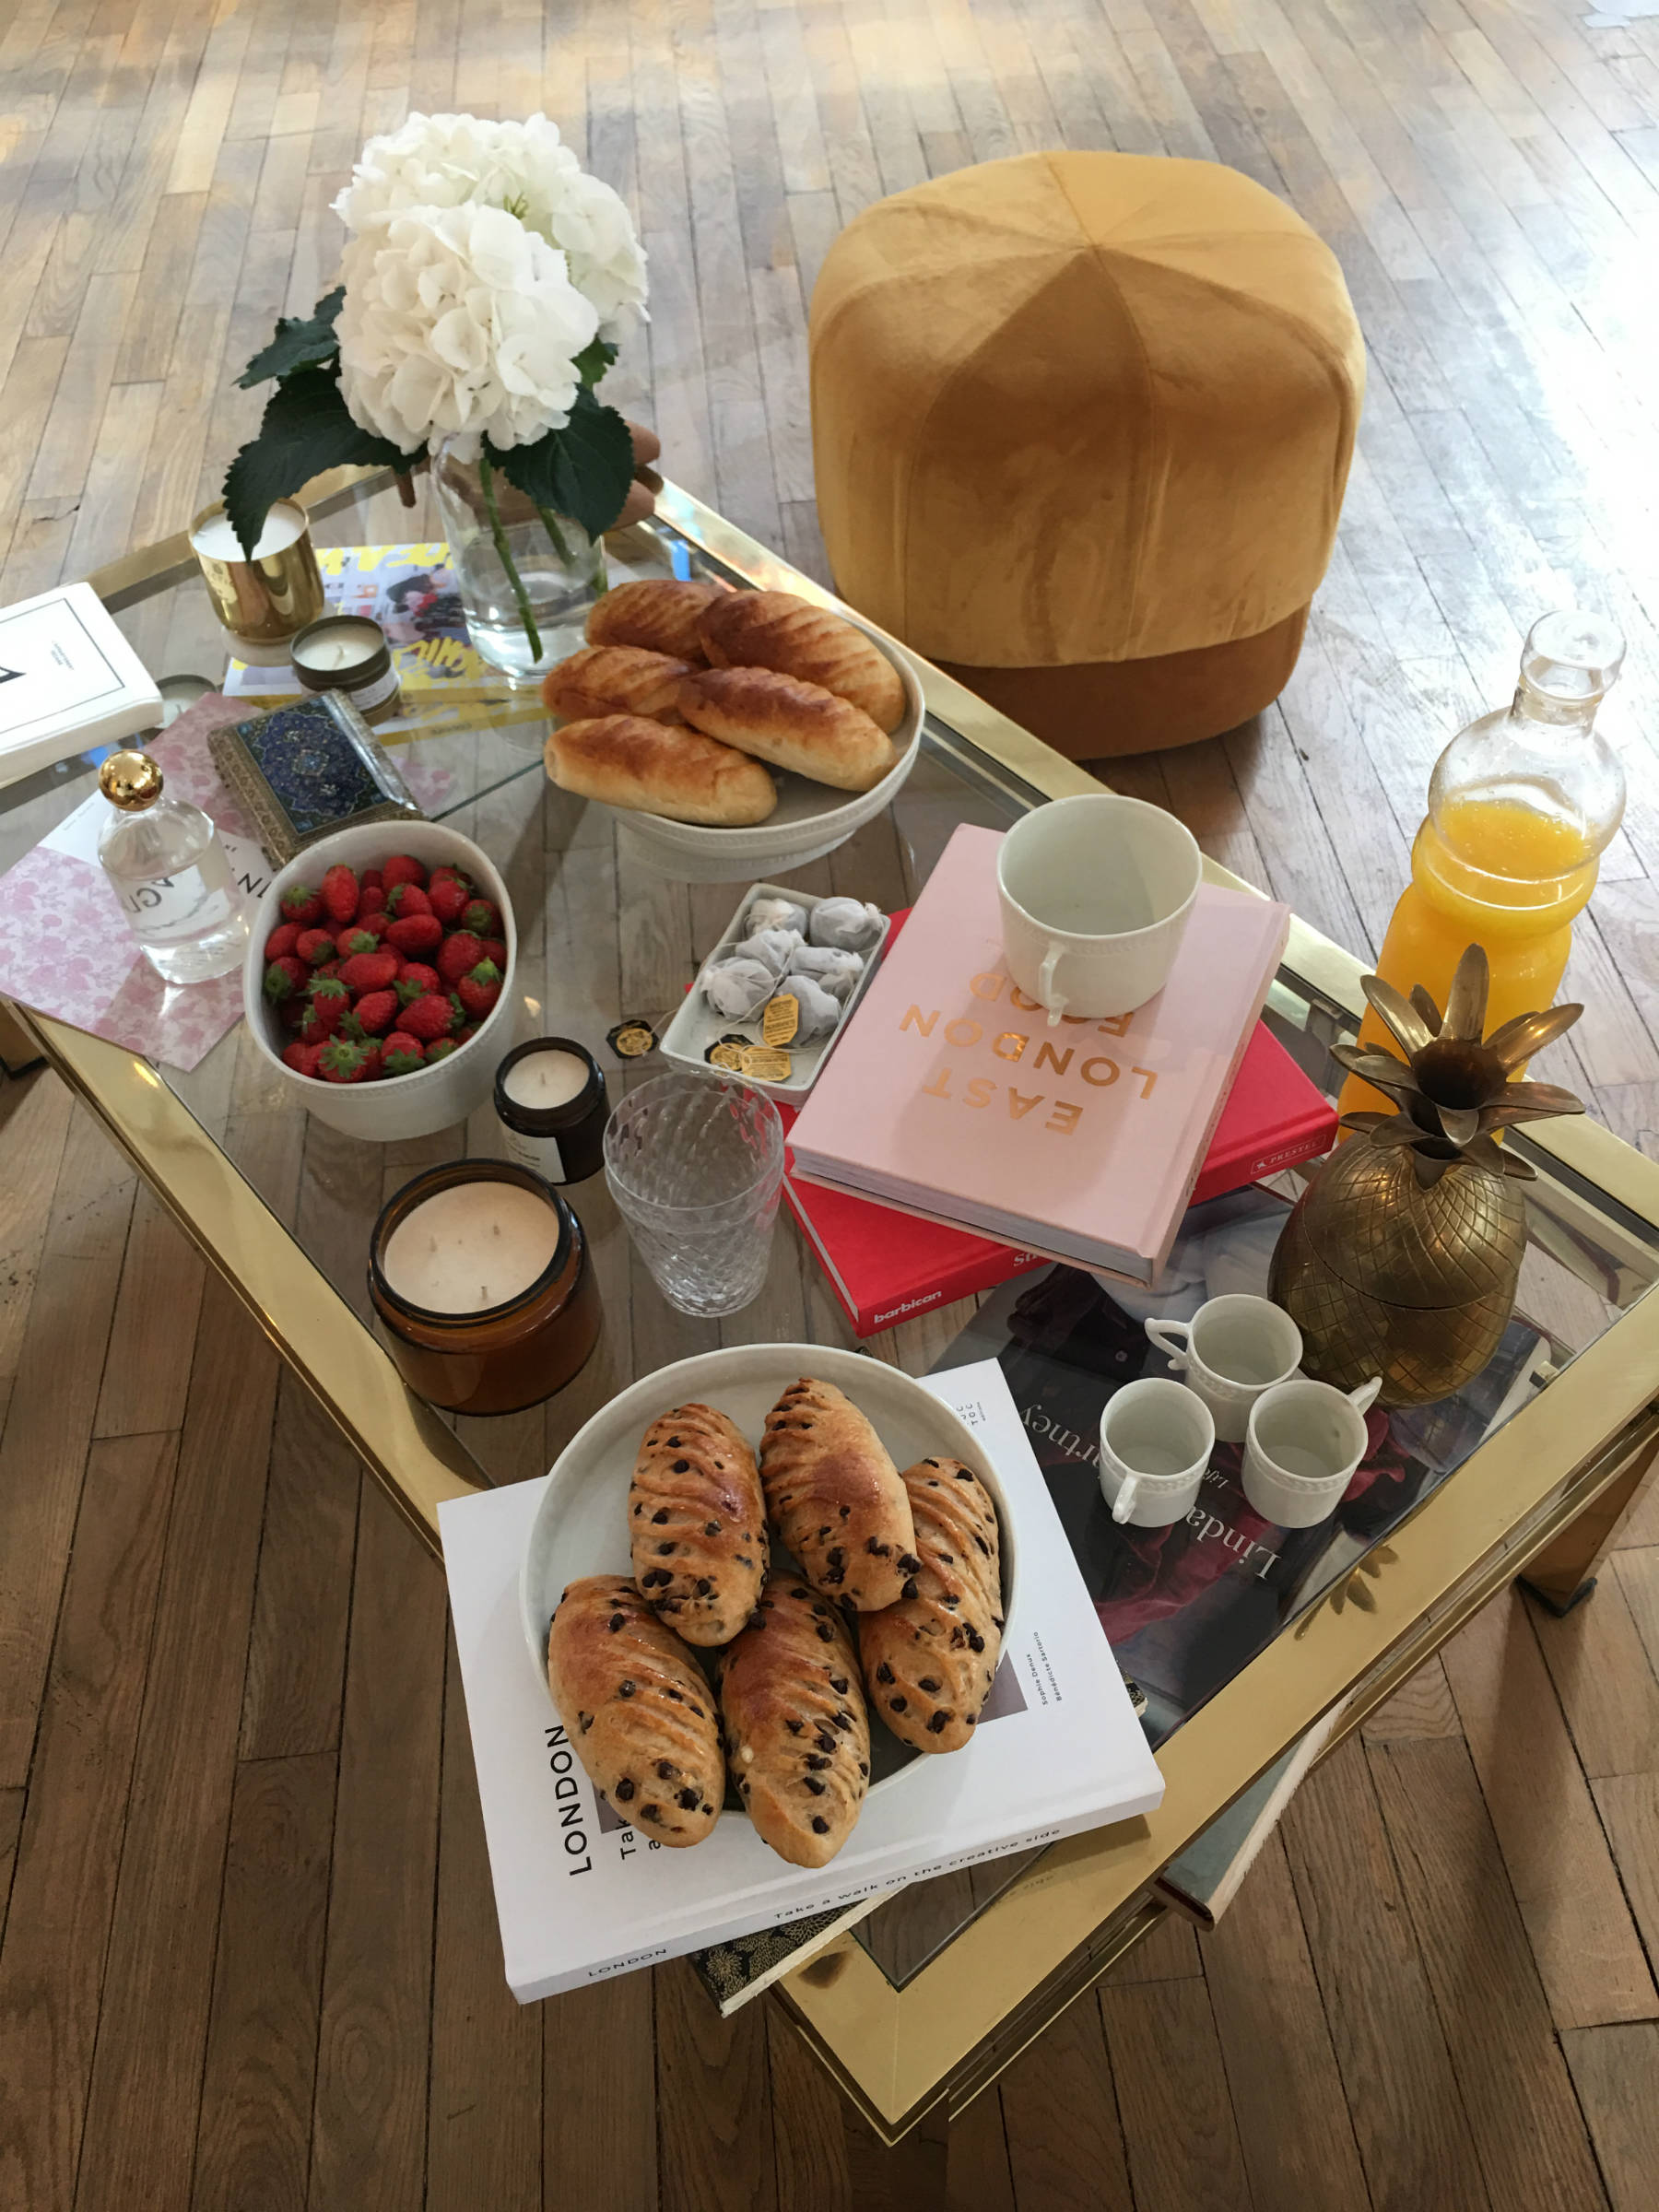 Coffee table with croissants, strawberries, orange juice, white peonies and books.